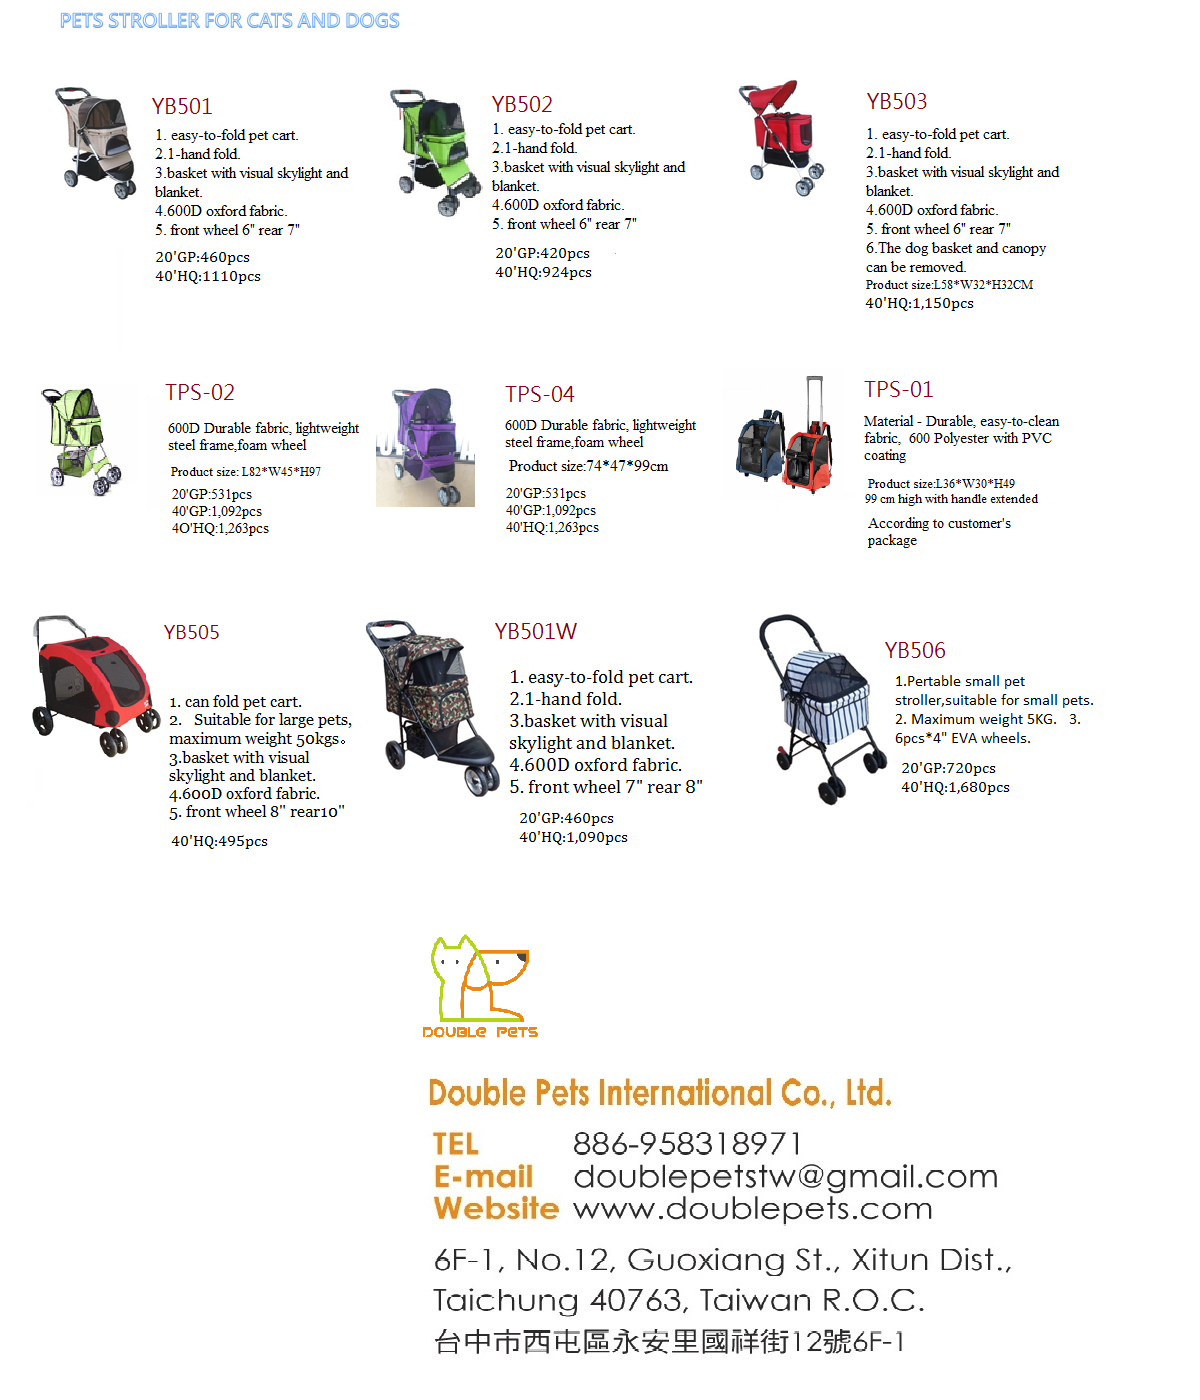 Pets stroller for cats and dogs